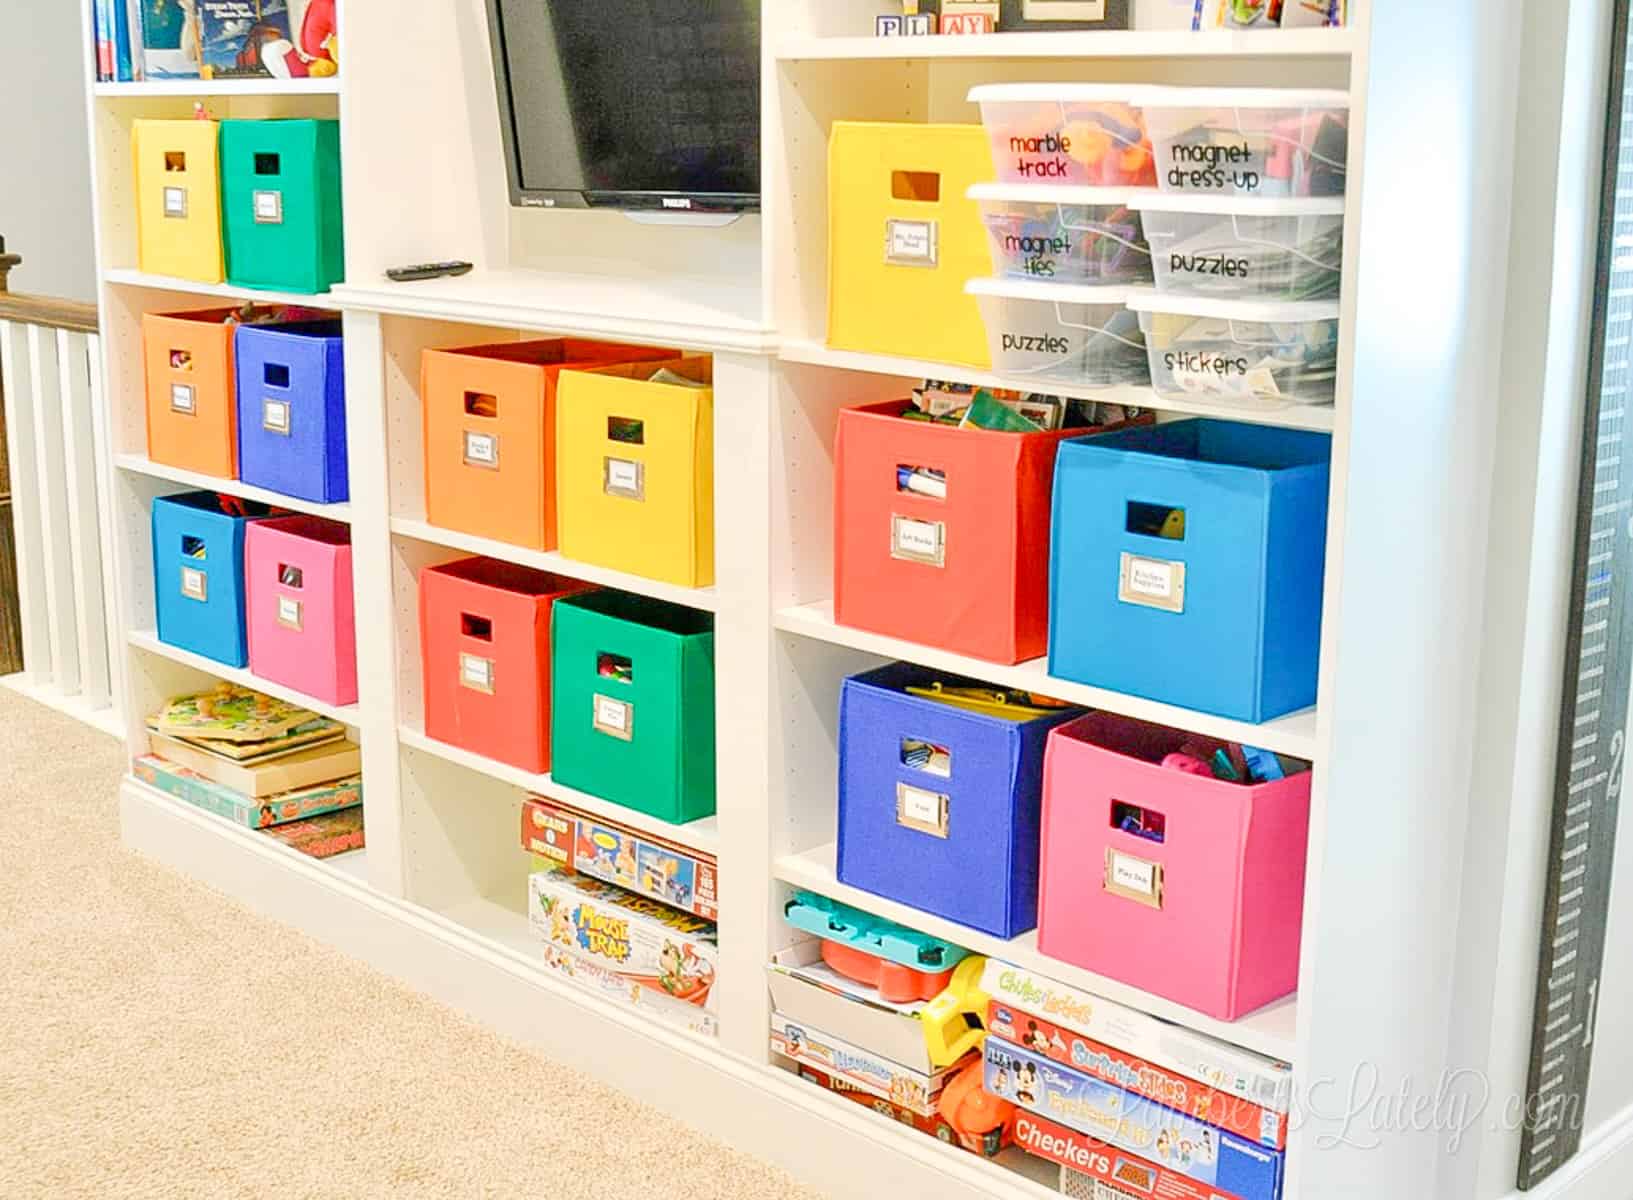 ikea billy bookcase built-ins with colorful bins in a playroom.